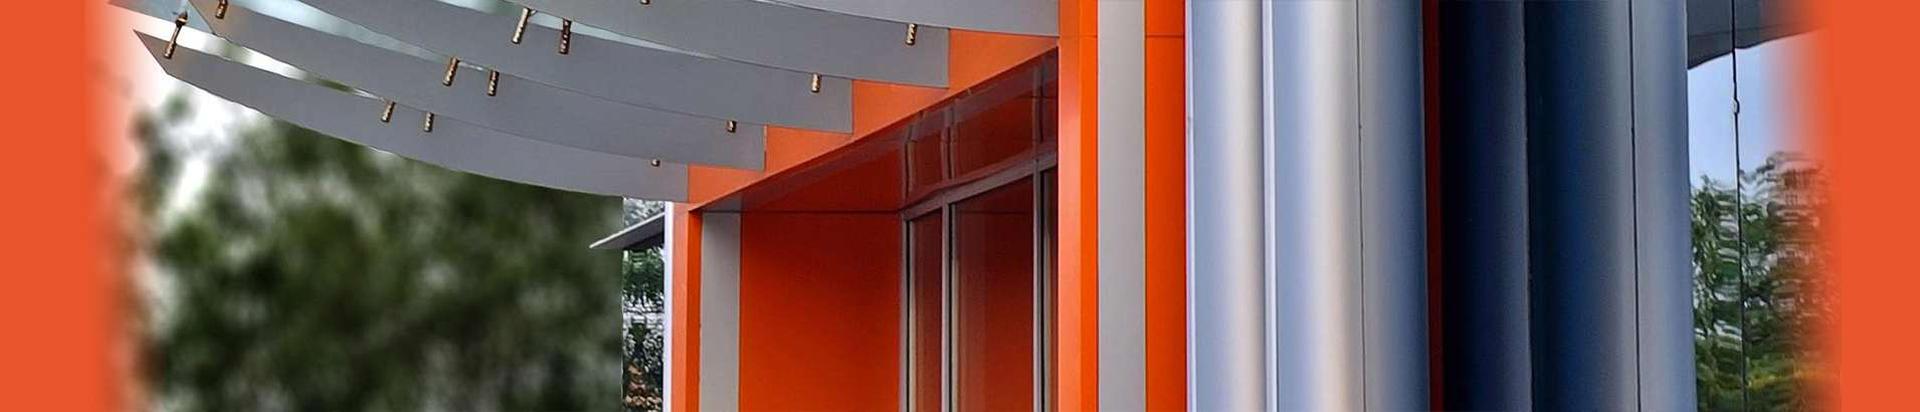 construction and finishing materials, Construction, Construction, Steel profile doors, Steel doors, Production, Fireproof doors, construction and real estate